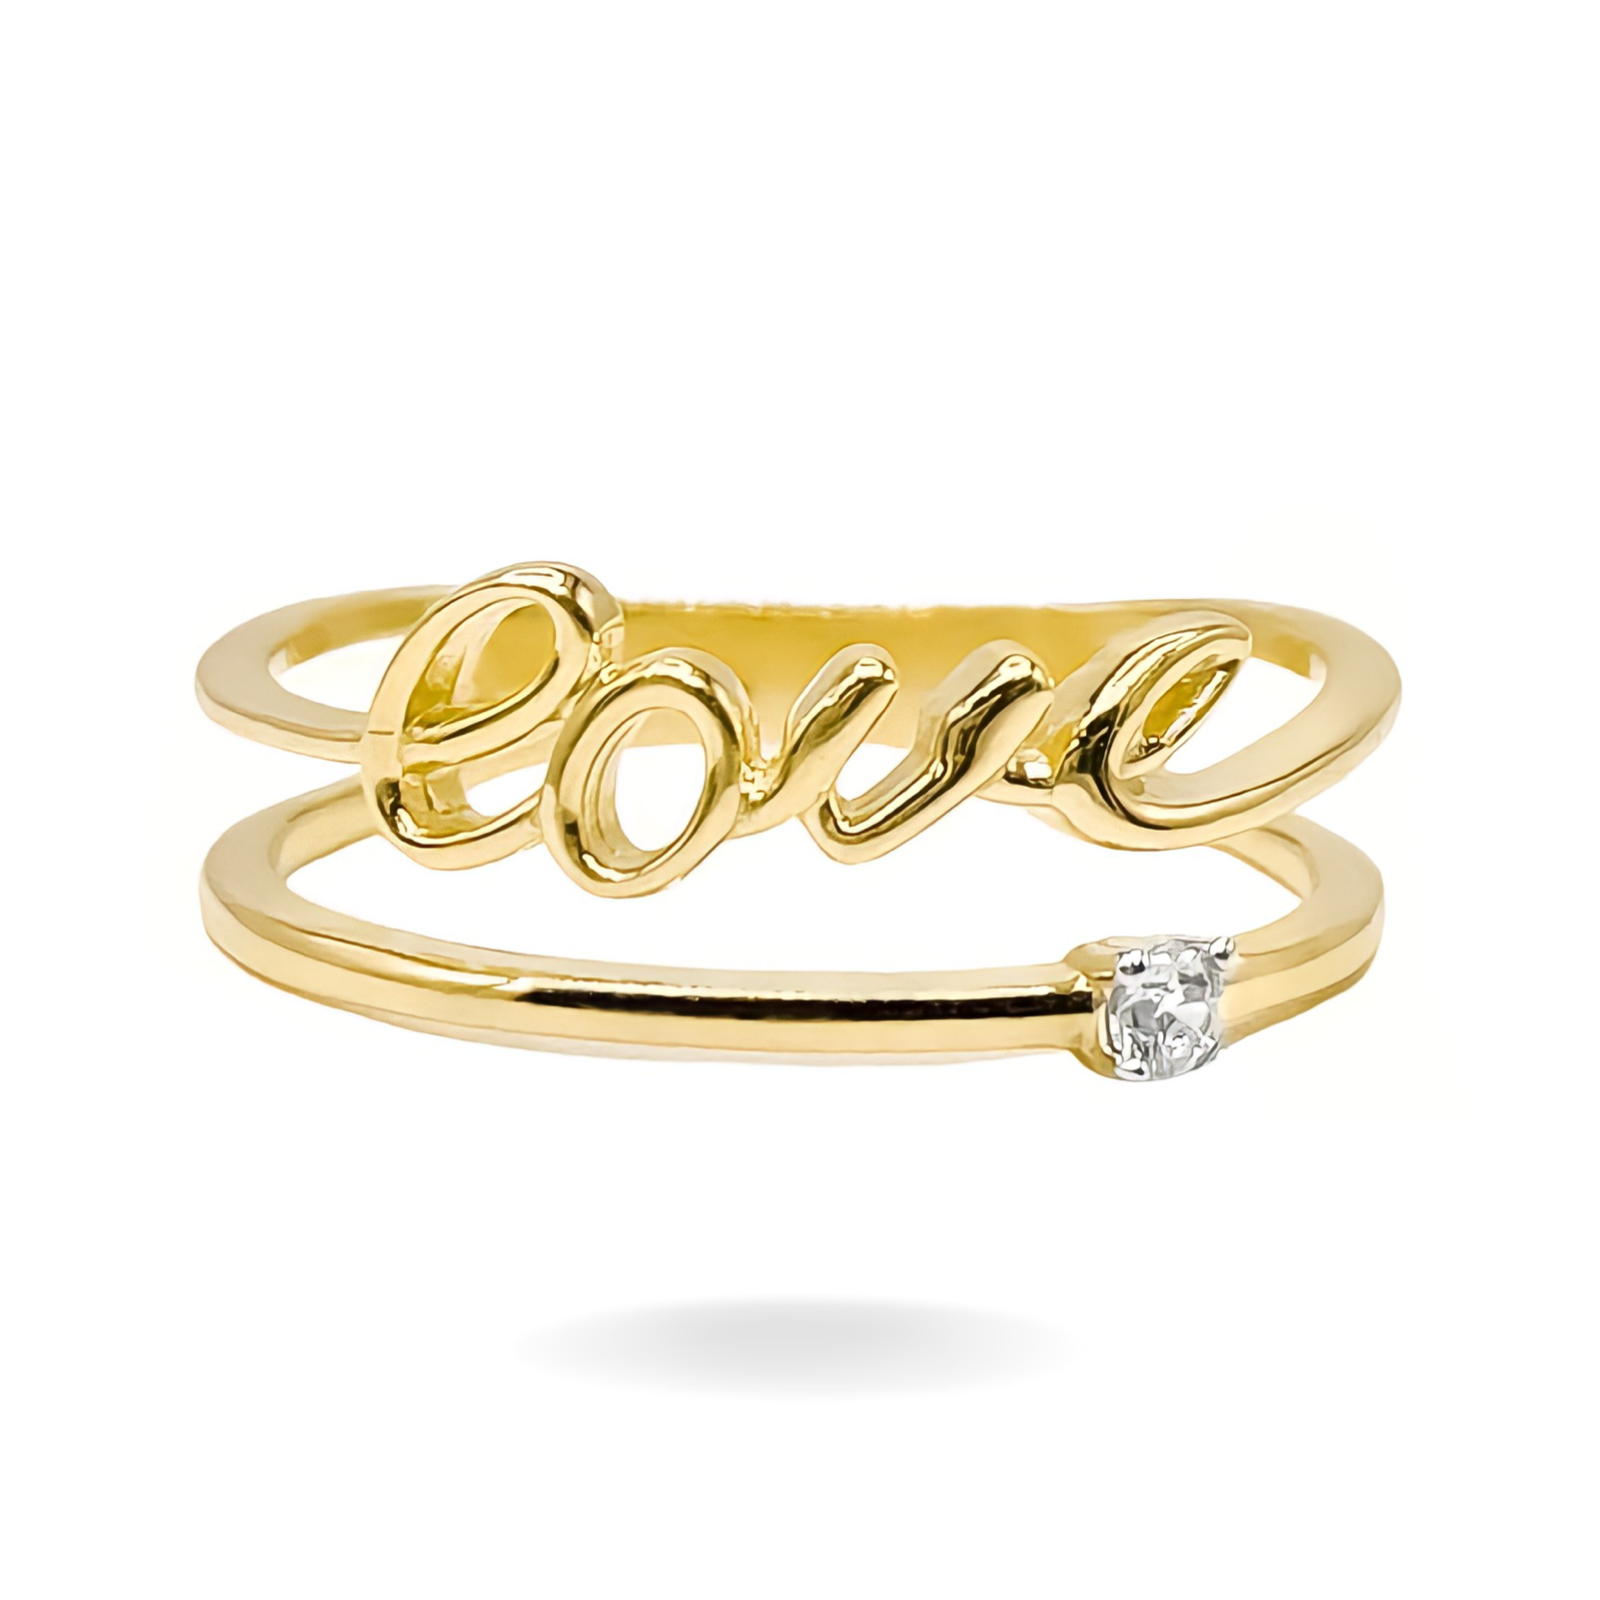 14K YELLOW GOLD WIRED LOVE DOUBLE RING